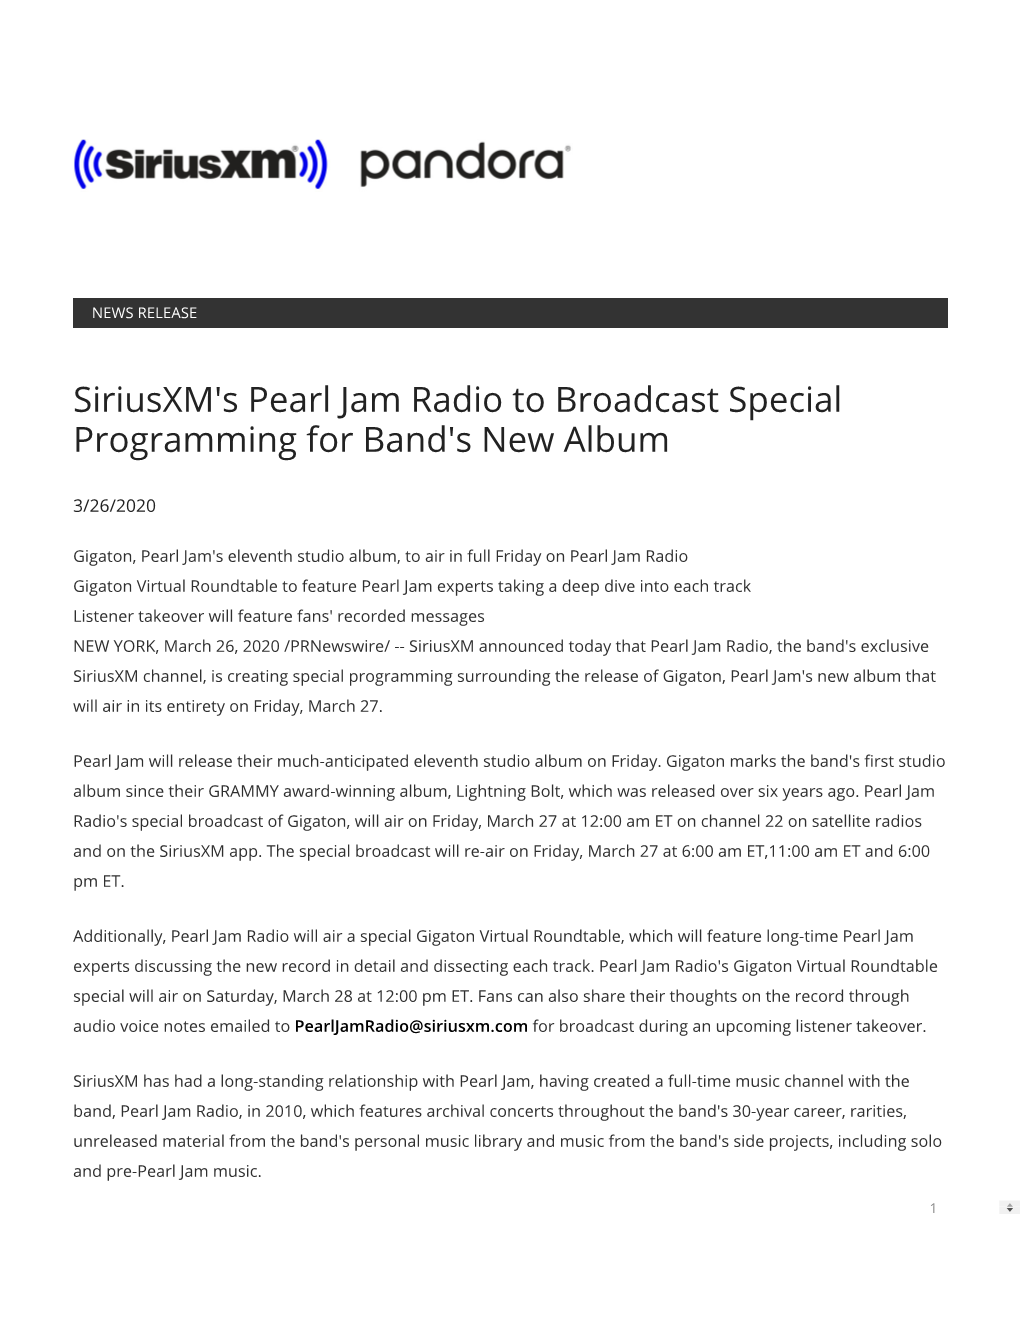 Siriusxm's Pearl Jam Radio to Broadcast Special Programming for Band's New Album